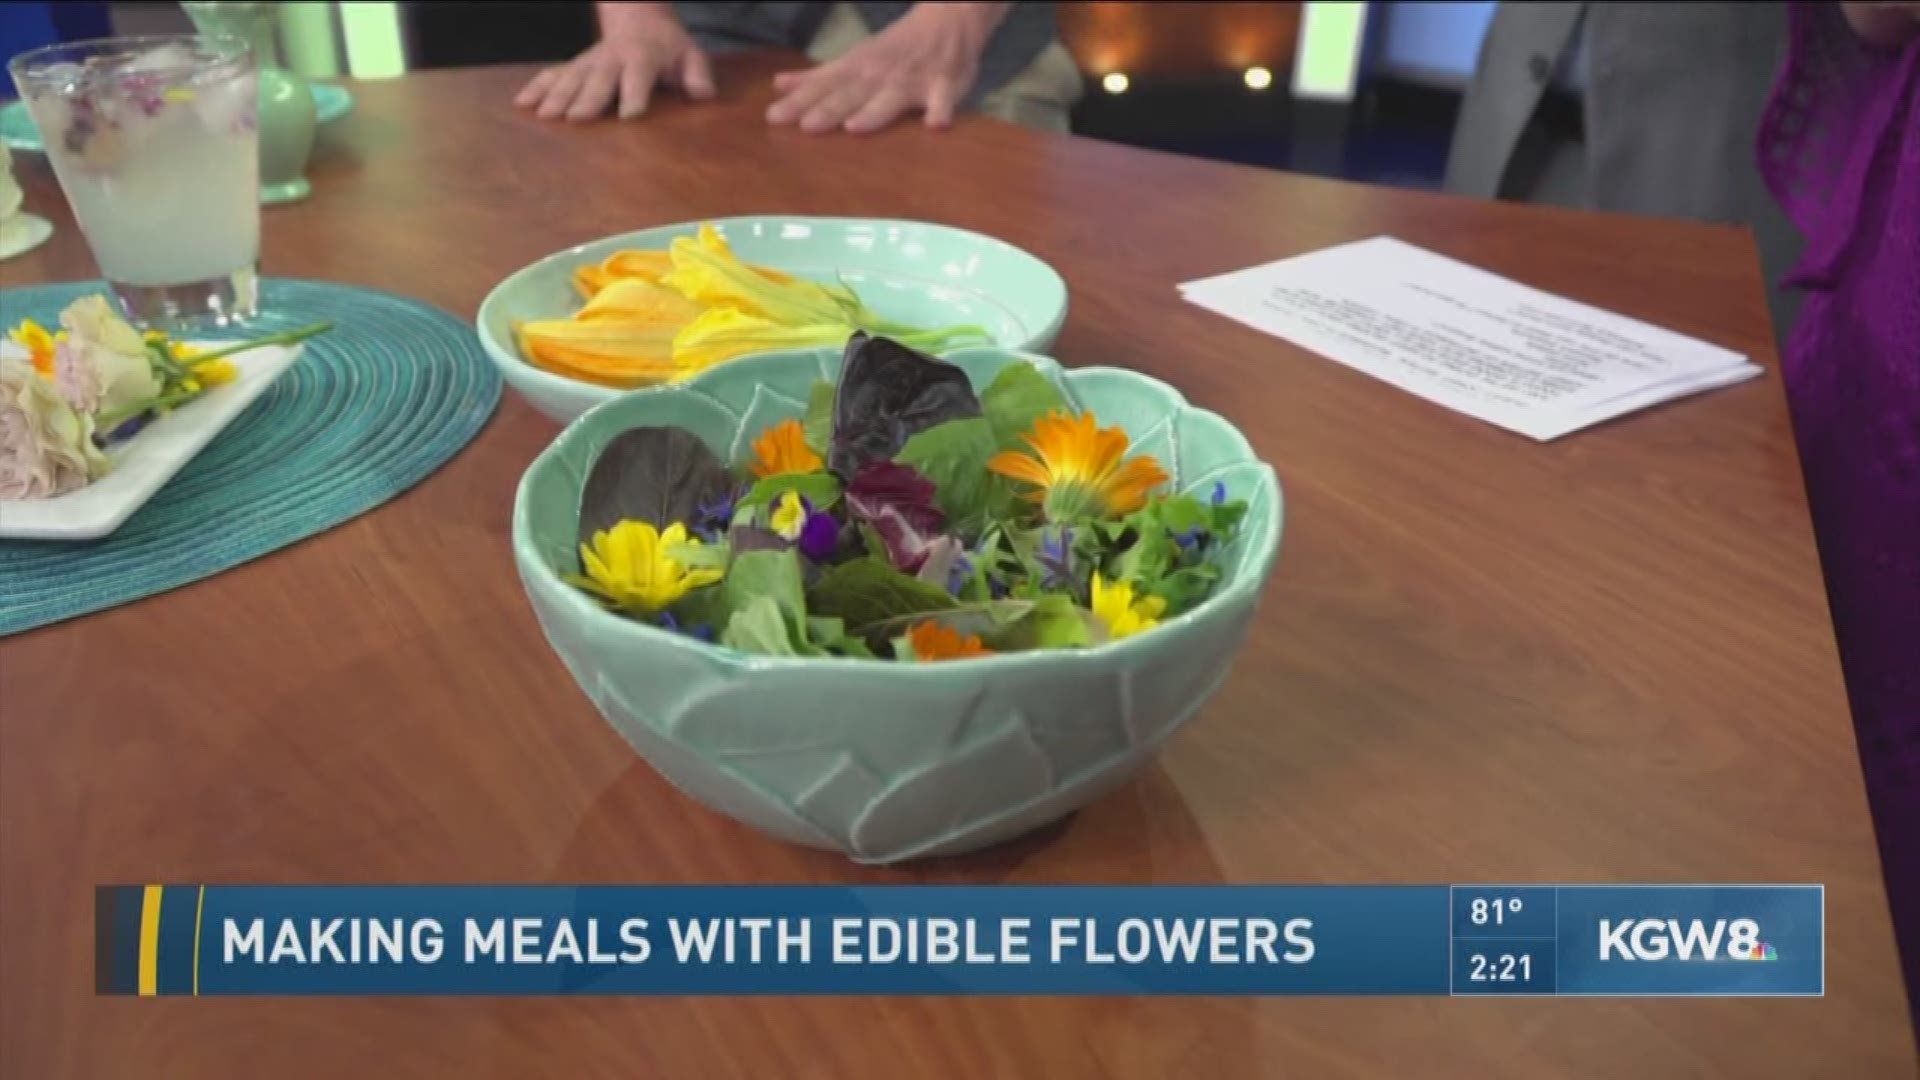 Making meals with edible flowers